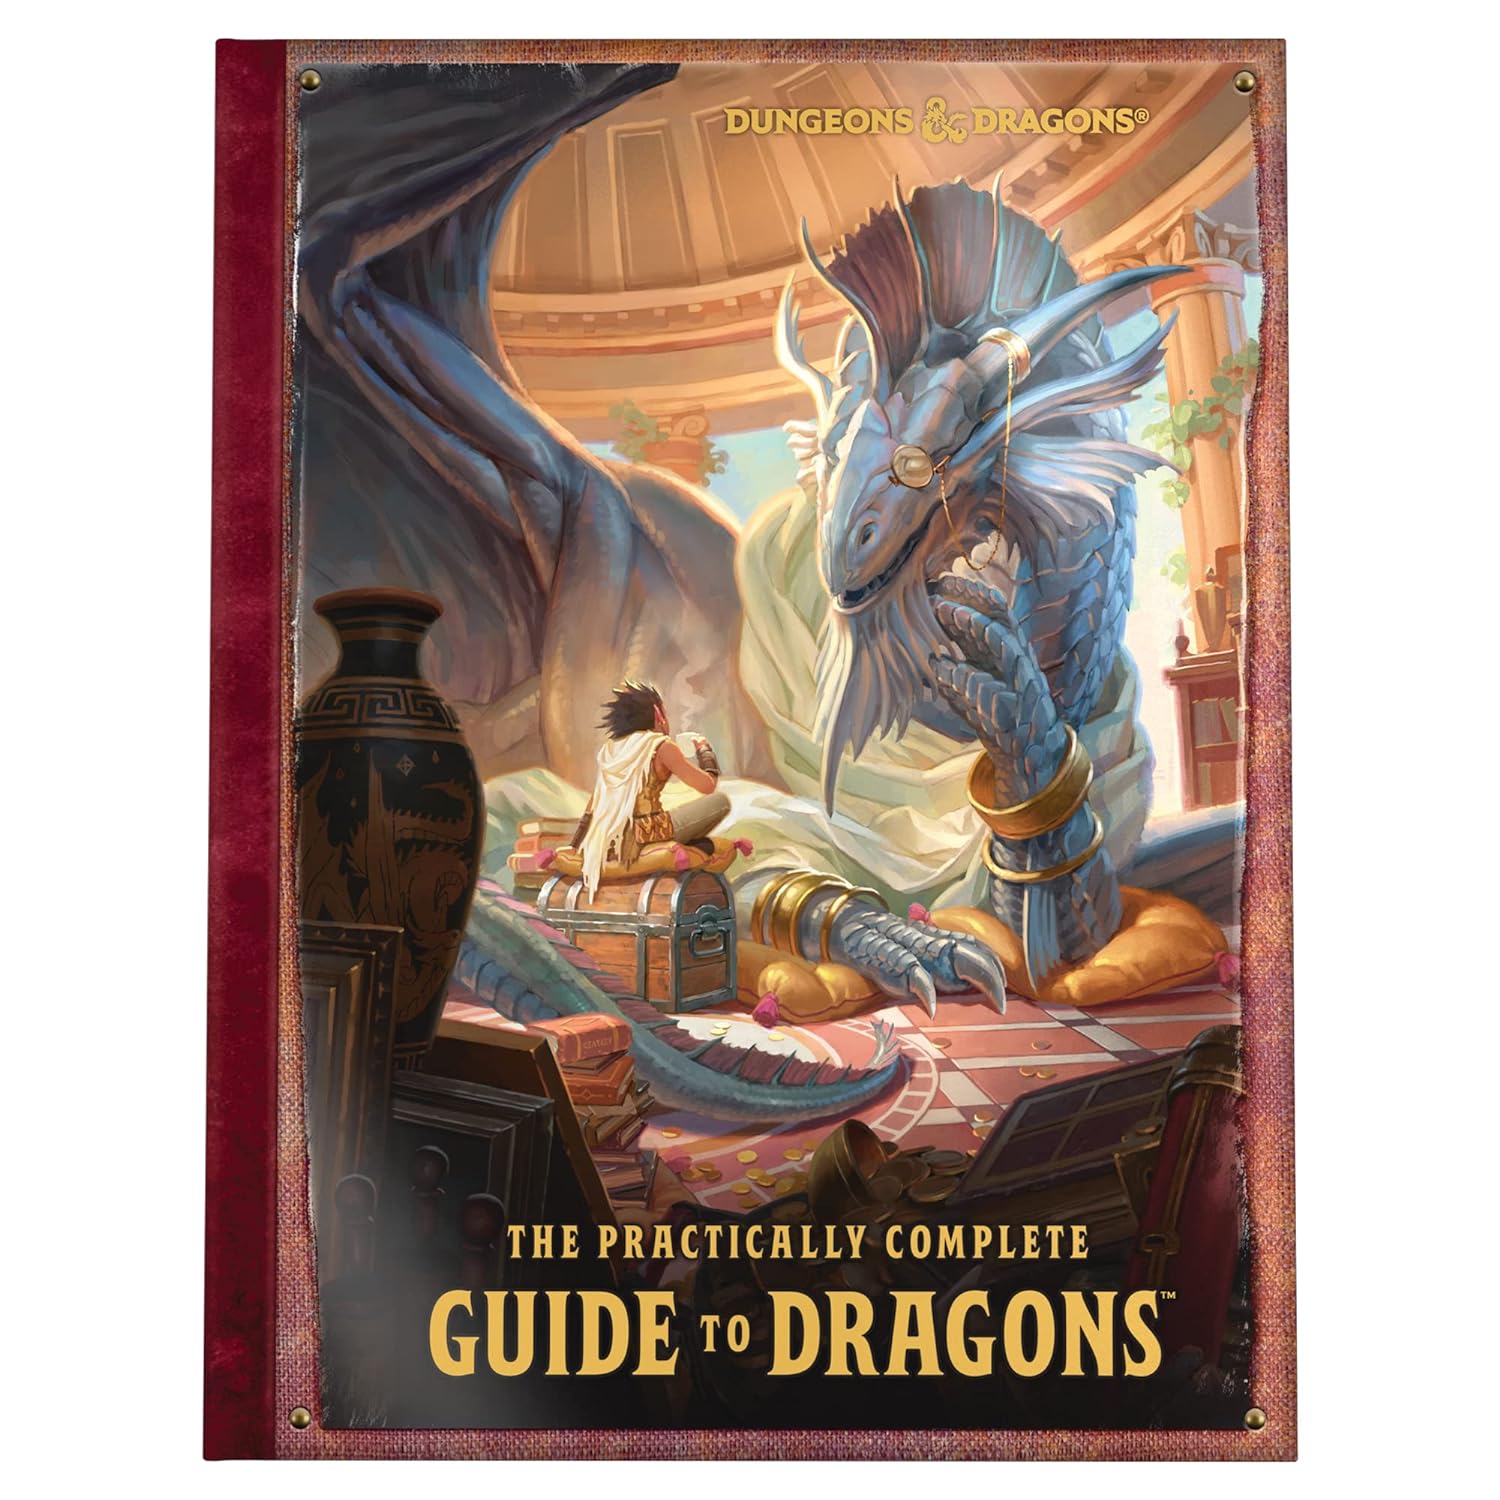 Dungeons & Dragons 5E: The Practically Complete Guide to Dragons Hardcover Book